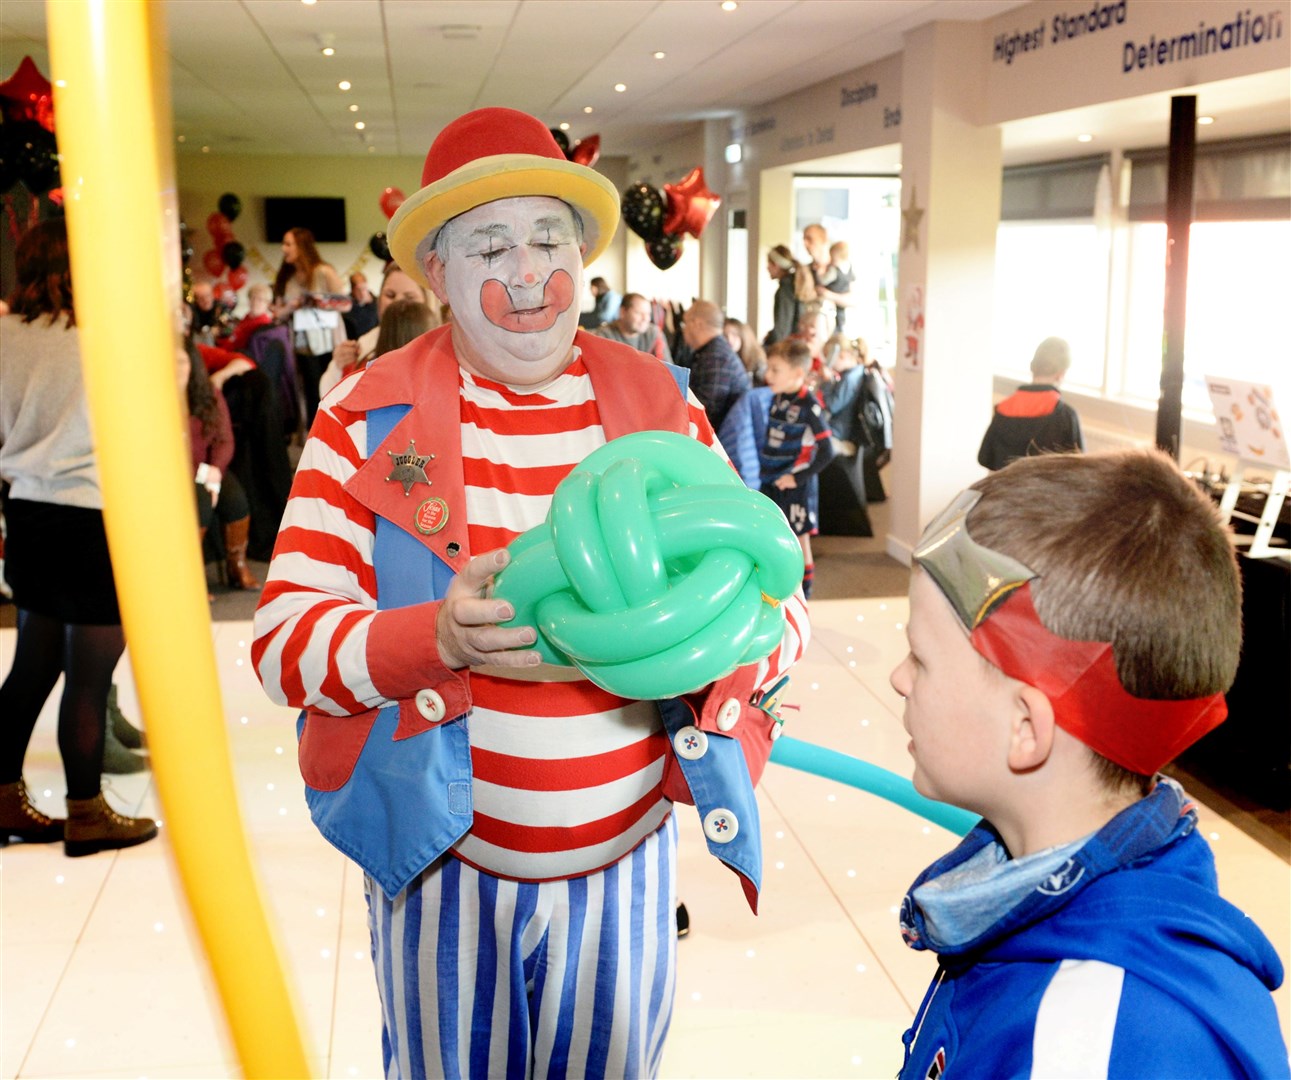 Ross County Brunch with Santa 2019..Bubbles the clown makes a balloon football for the children to play with..Picture: James MacKenzie..